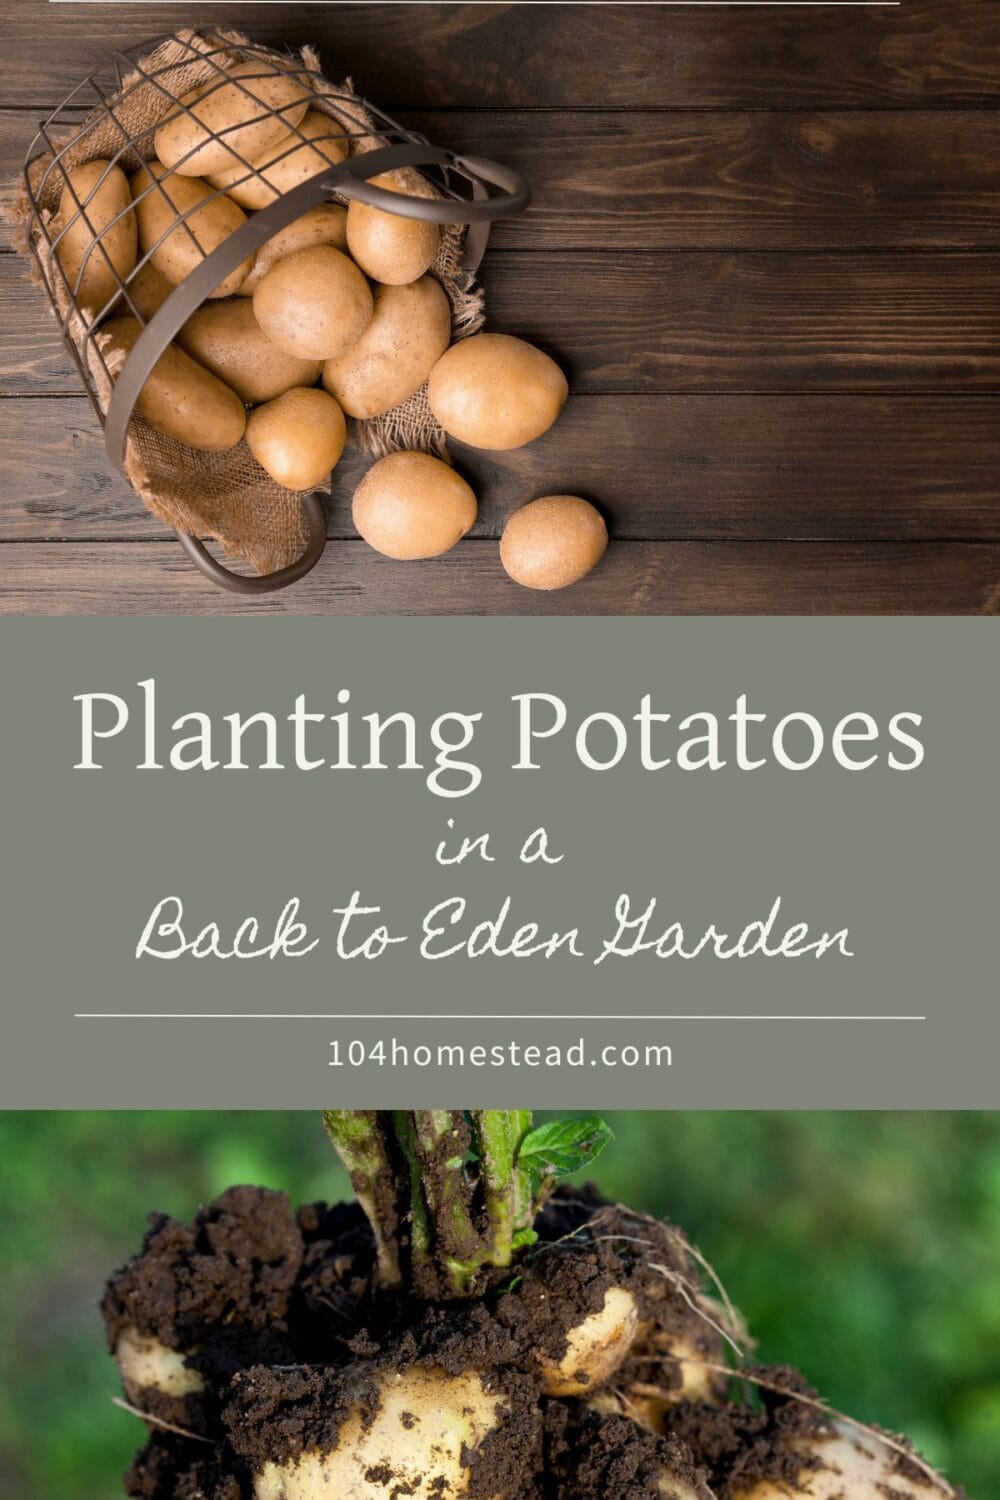 A Pinterest-friendly graphic for my post that details how to plant potatoes in a Back to Eden garden.